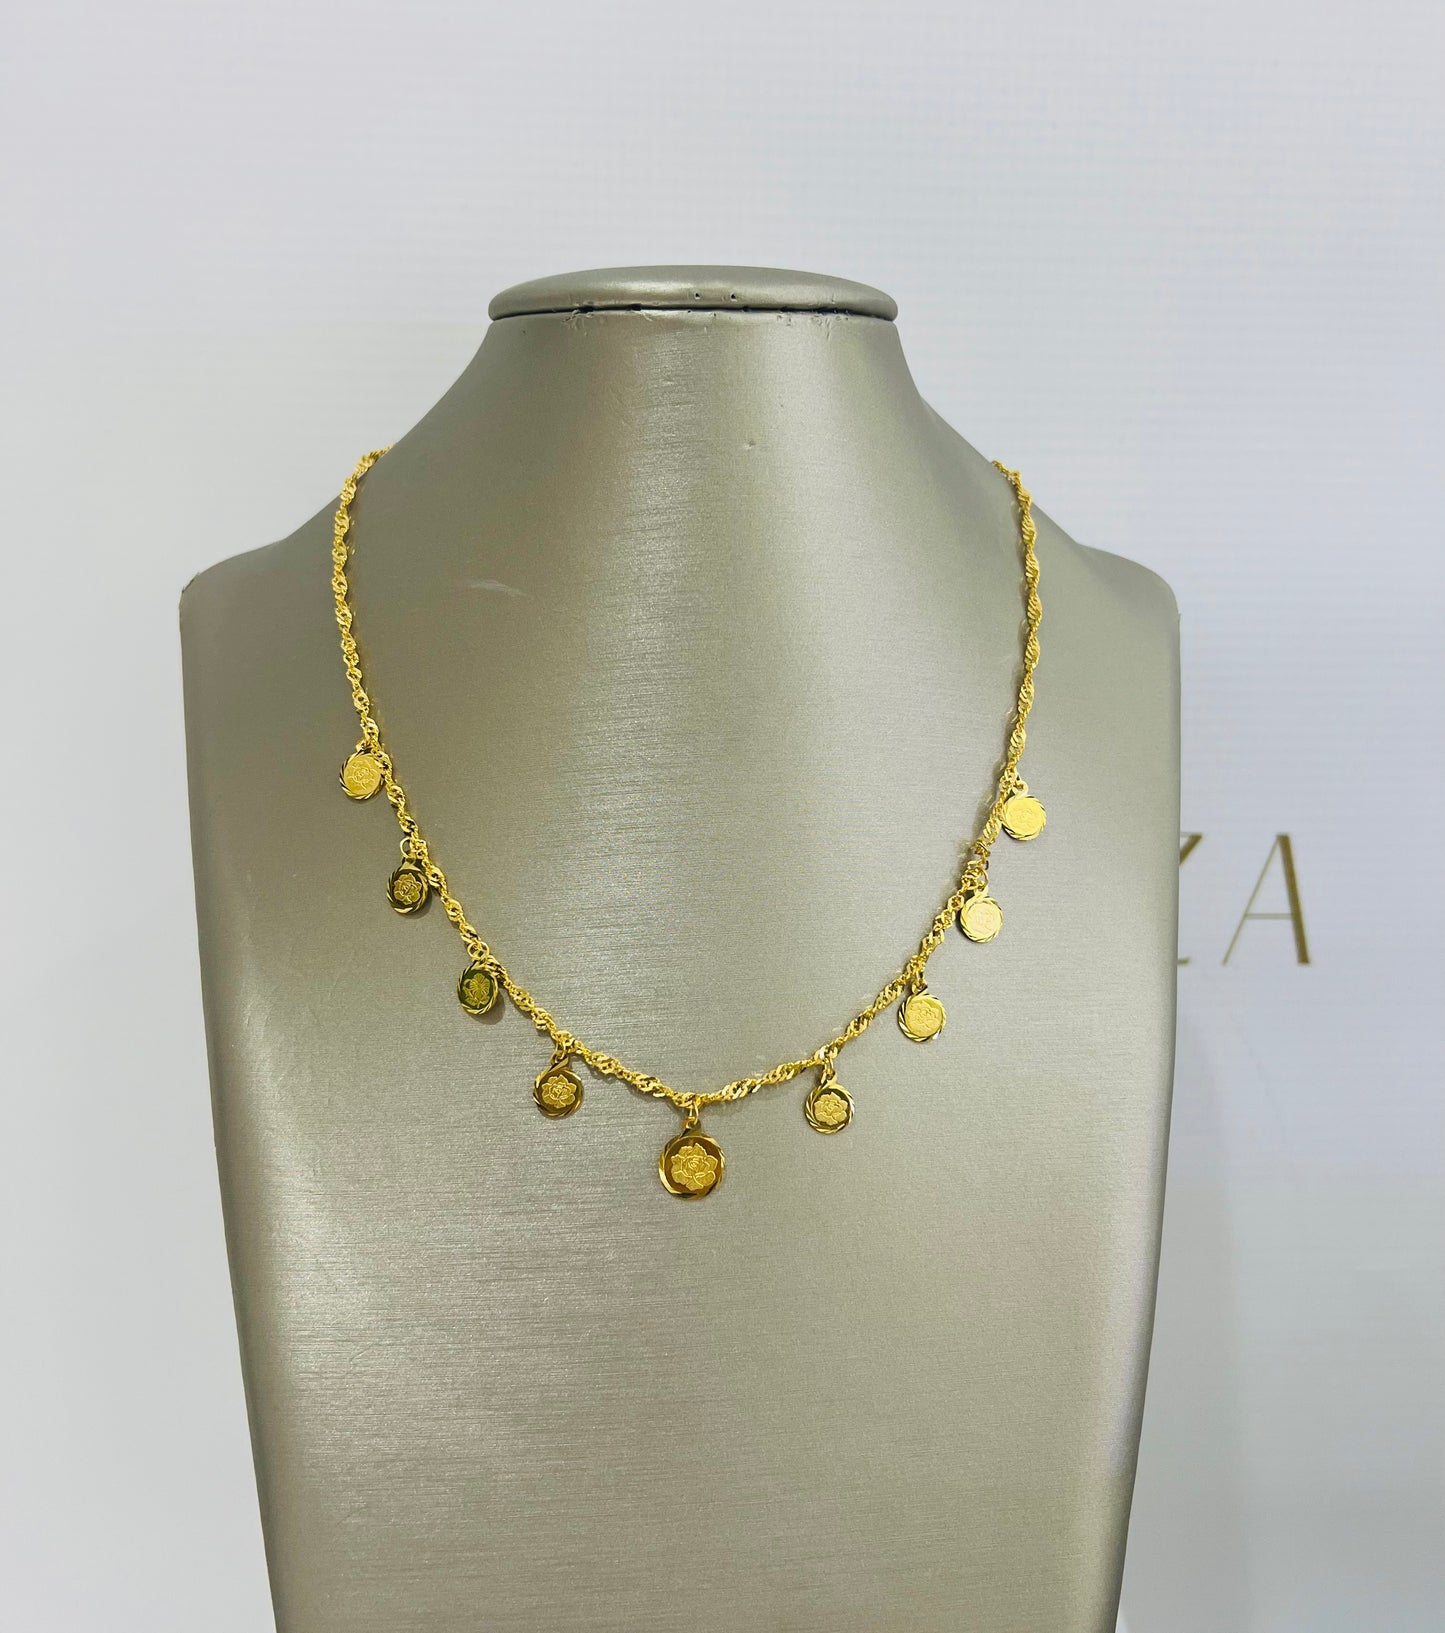 21k Gold Flower Coin Necklace